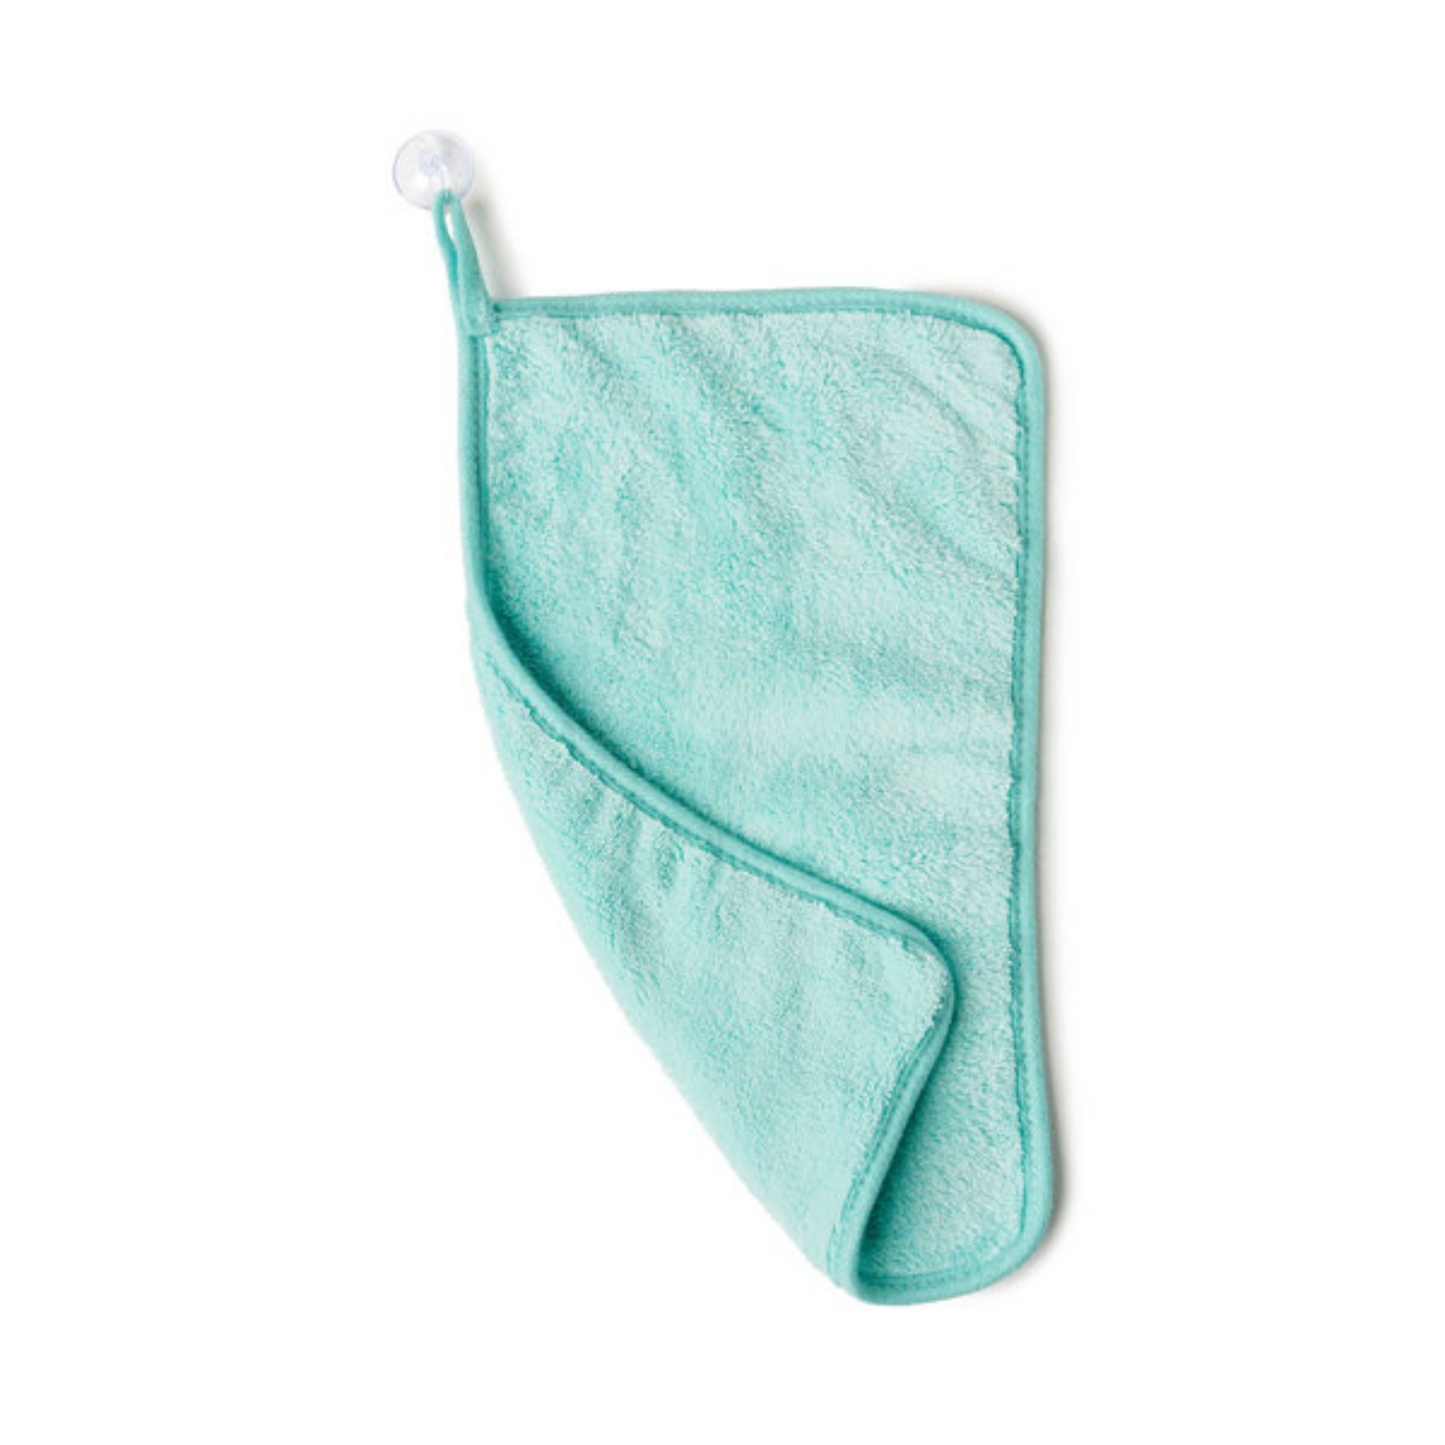 Water Works makeup removing towel in mint